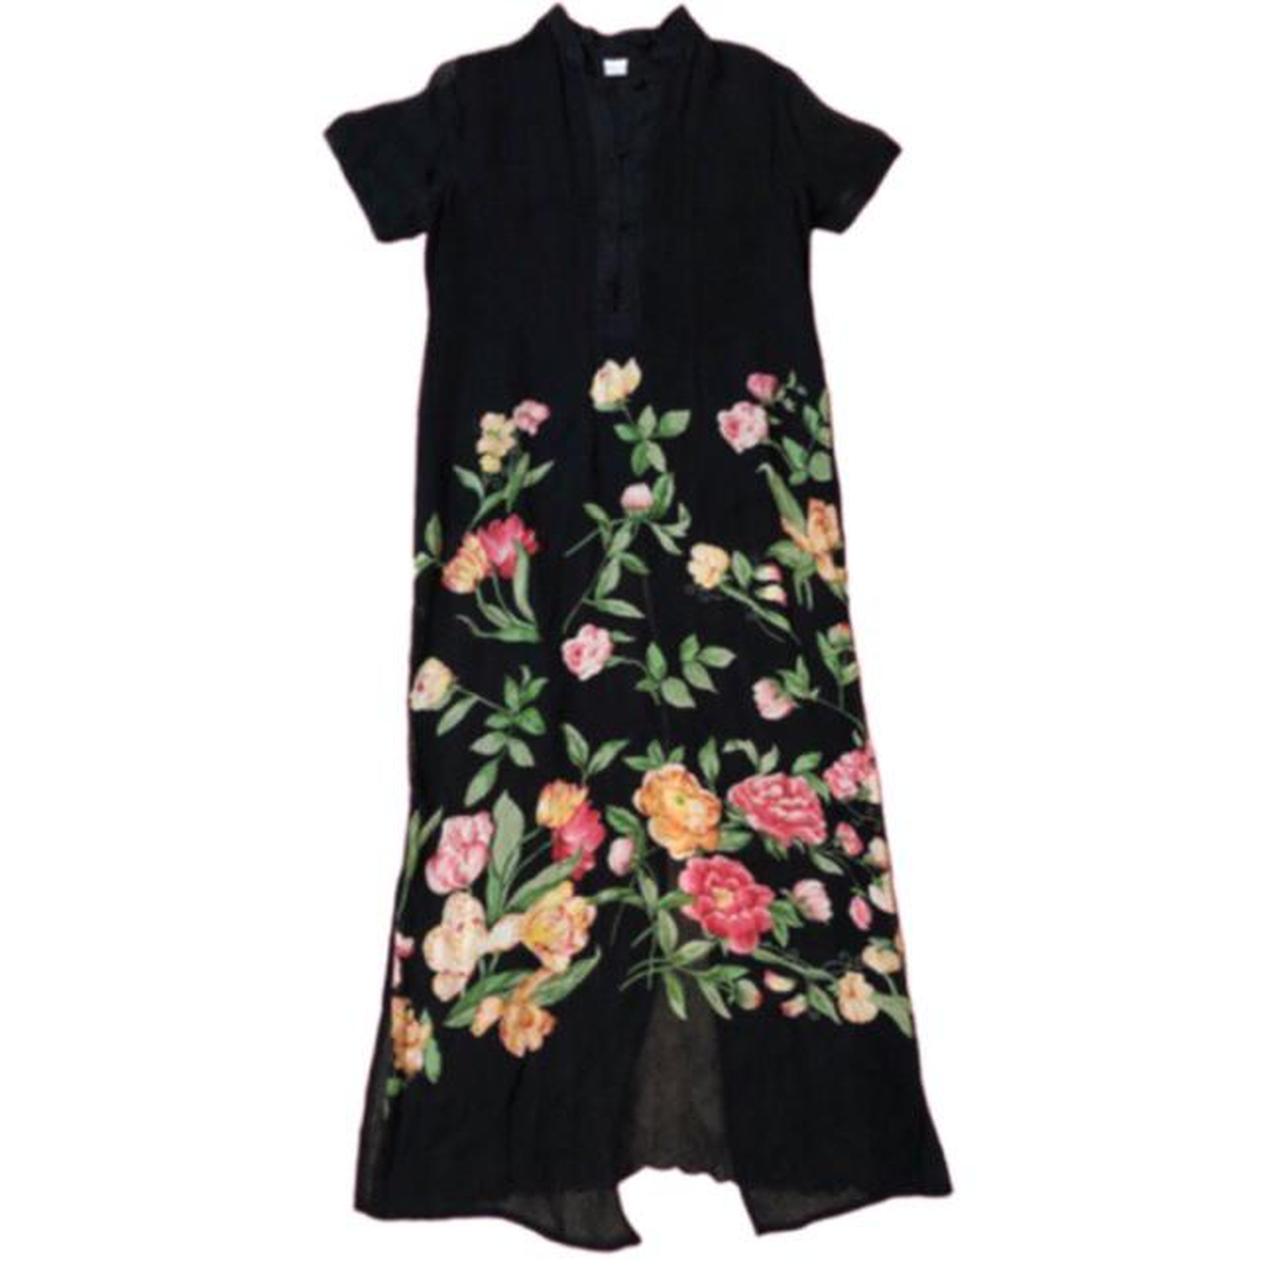 Rose Women's Black and Pink Dress (2)